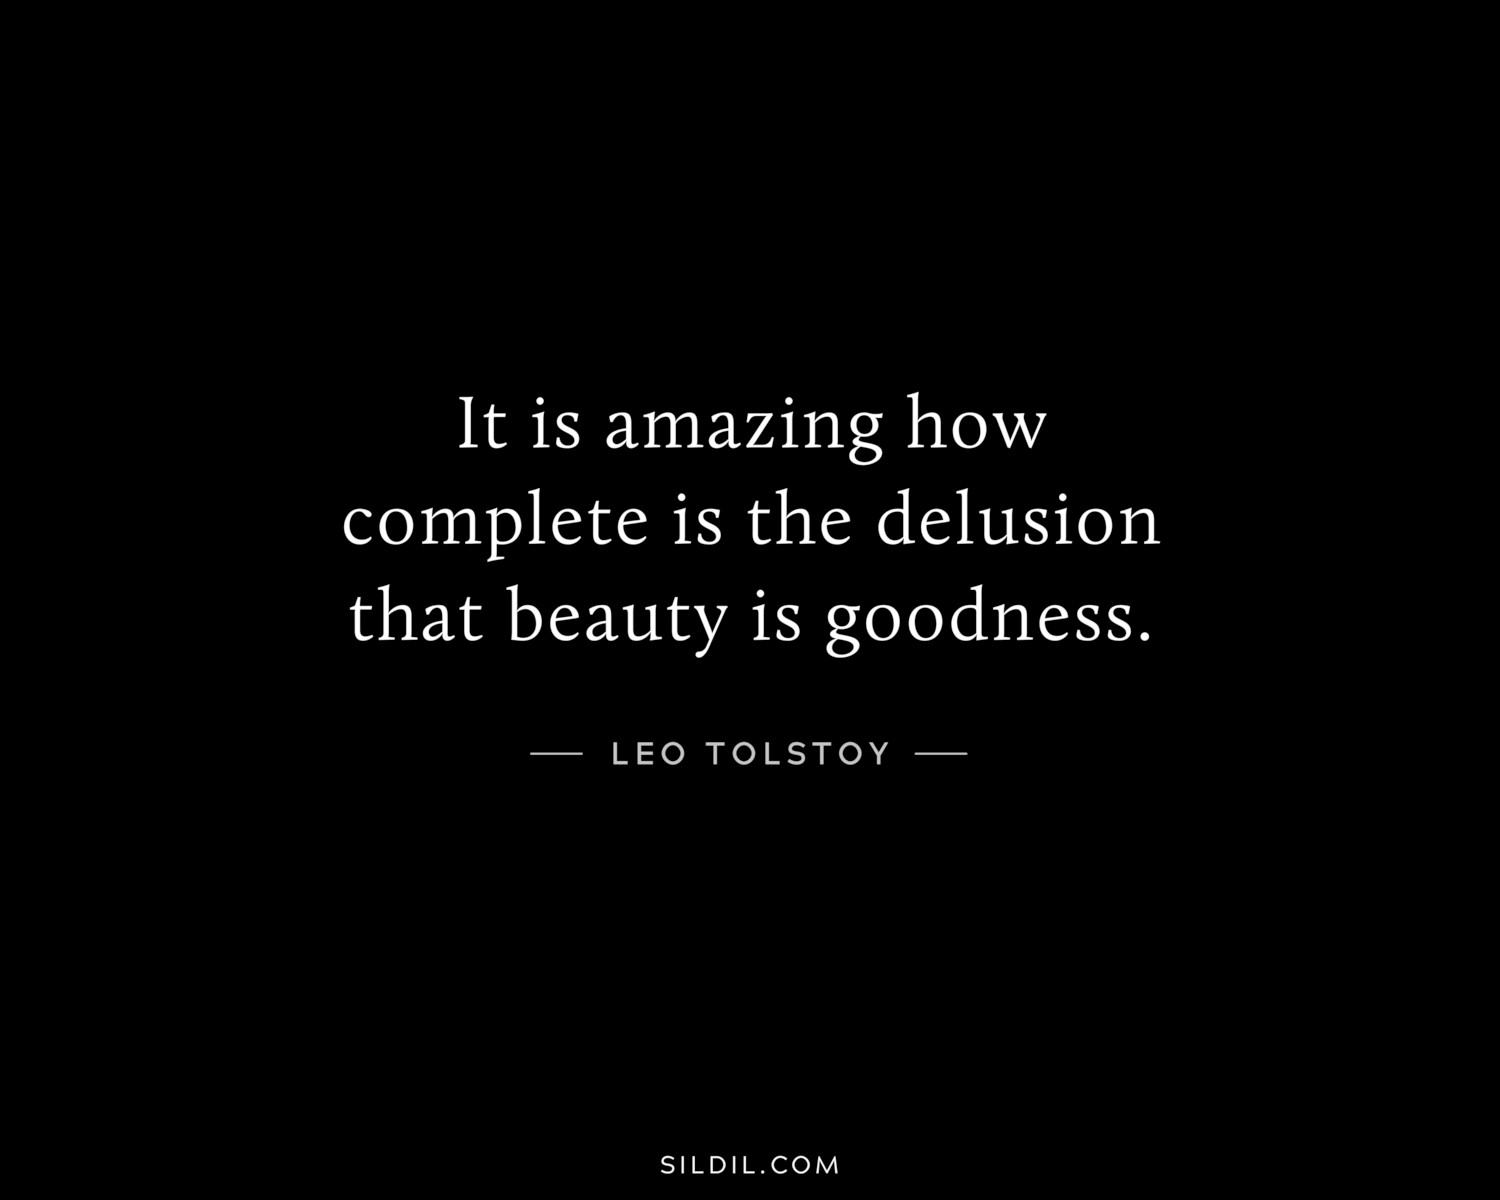 It is amazing how complete is the delusion that beauty is goodness.